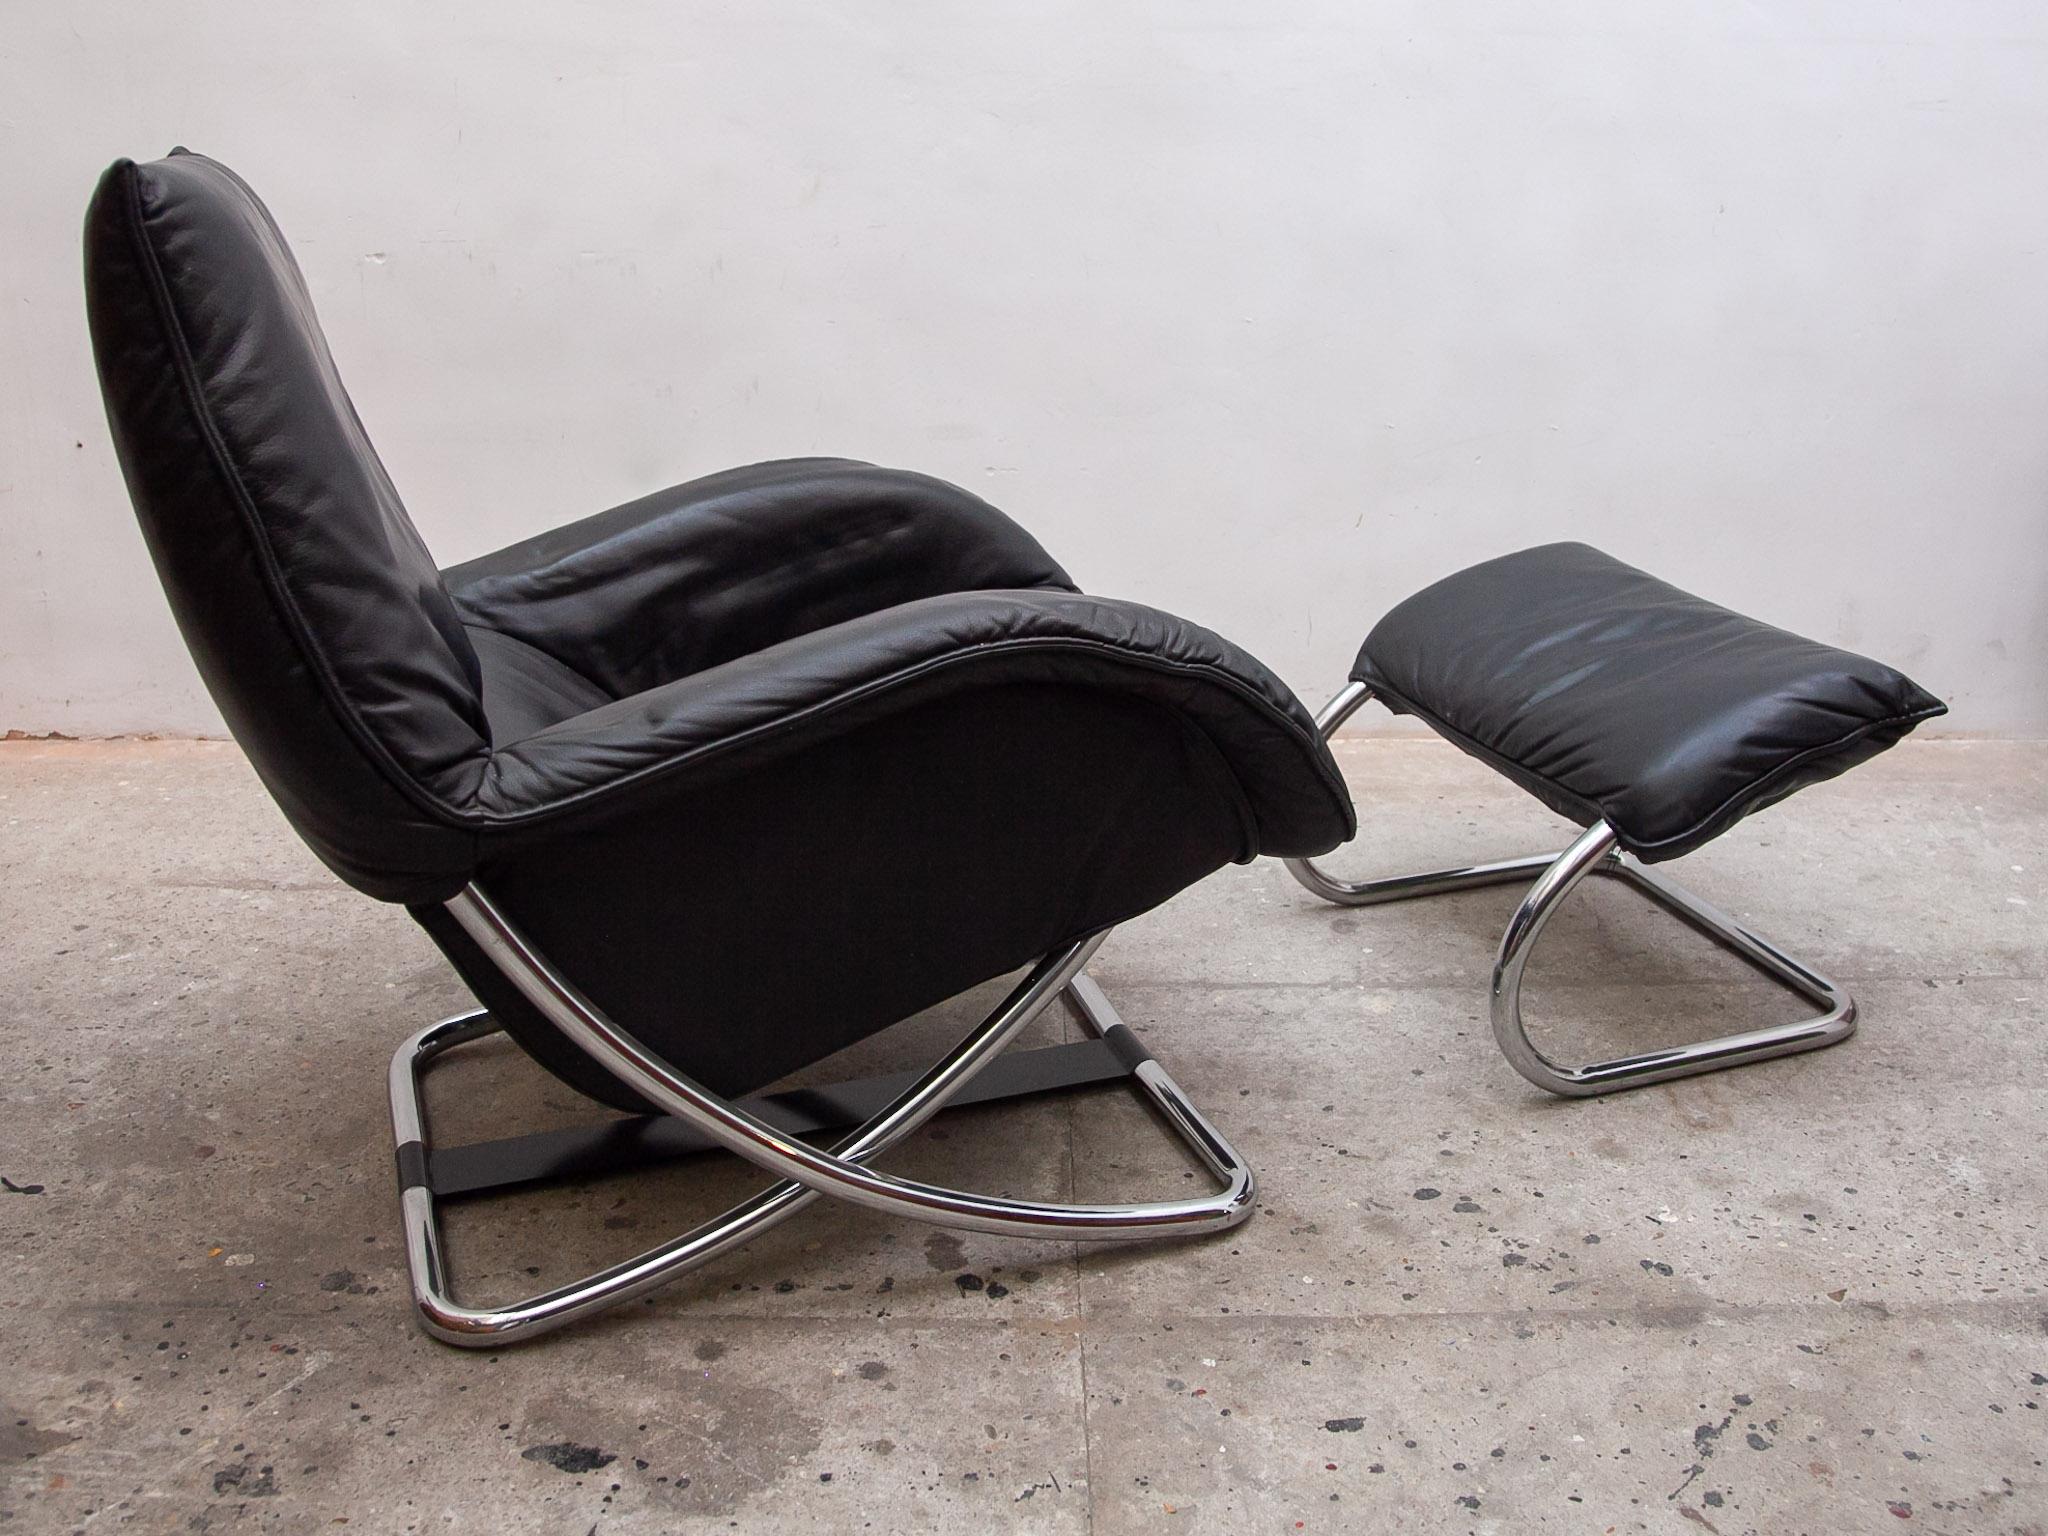 Beautifully designed comfortable chrome tube rocking lounge chair and ottoman, covered in soft black leather, Excellent condition.The chair is adjustable in various positions from sitting to lying down. A must have for relaxing in your interior or